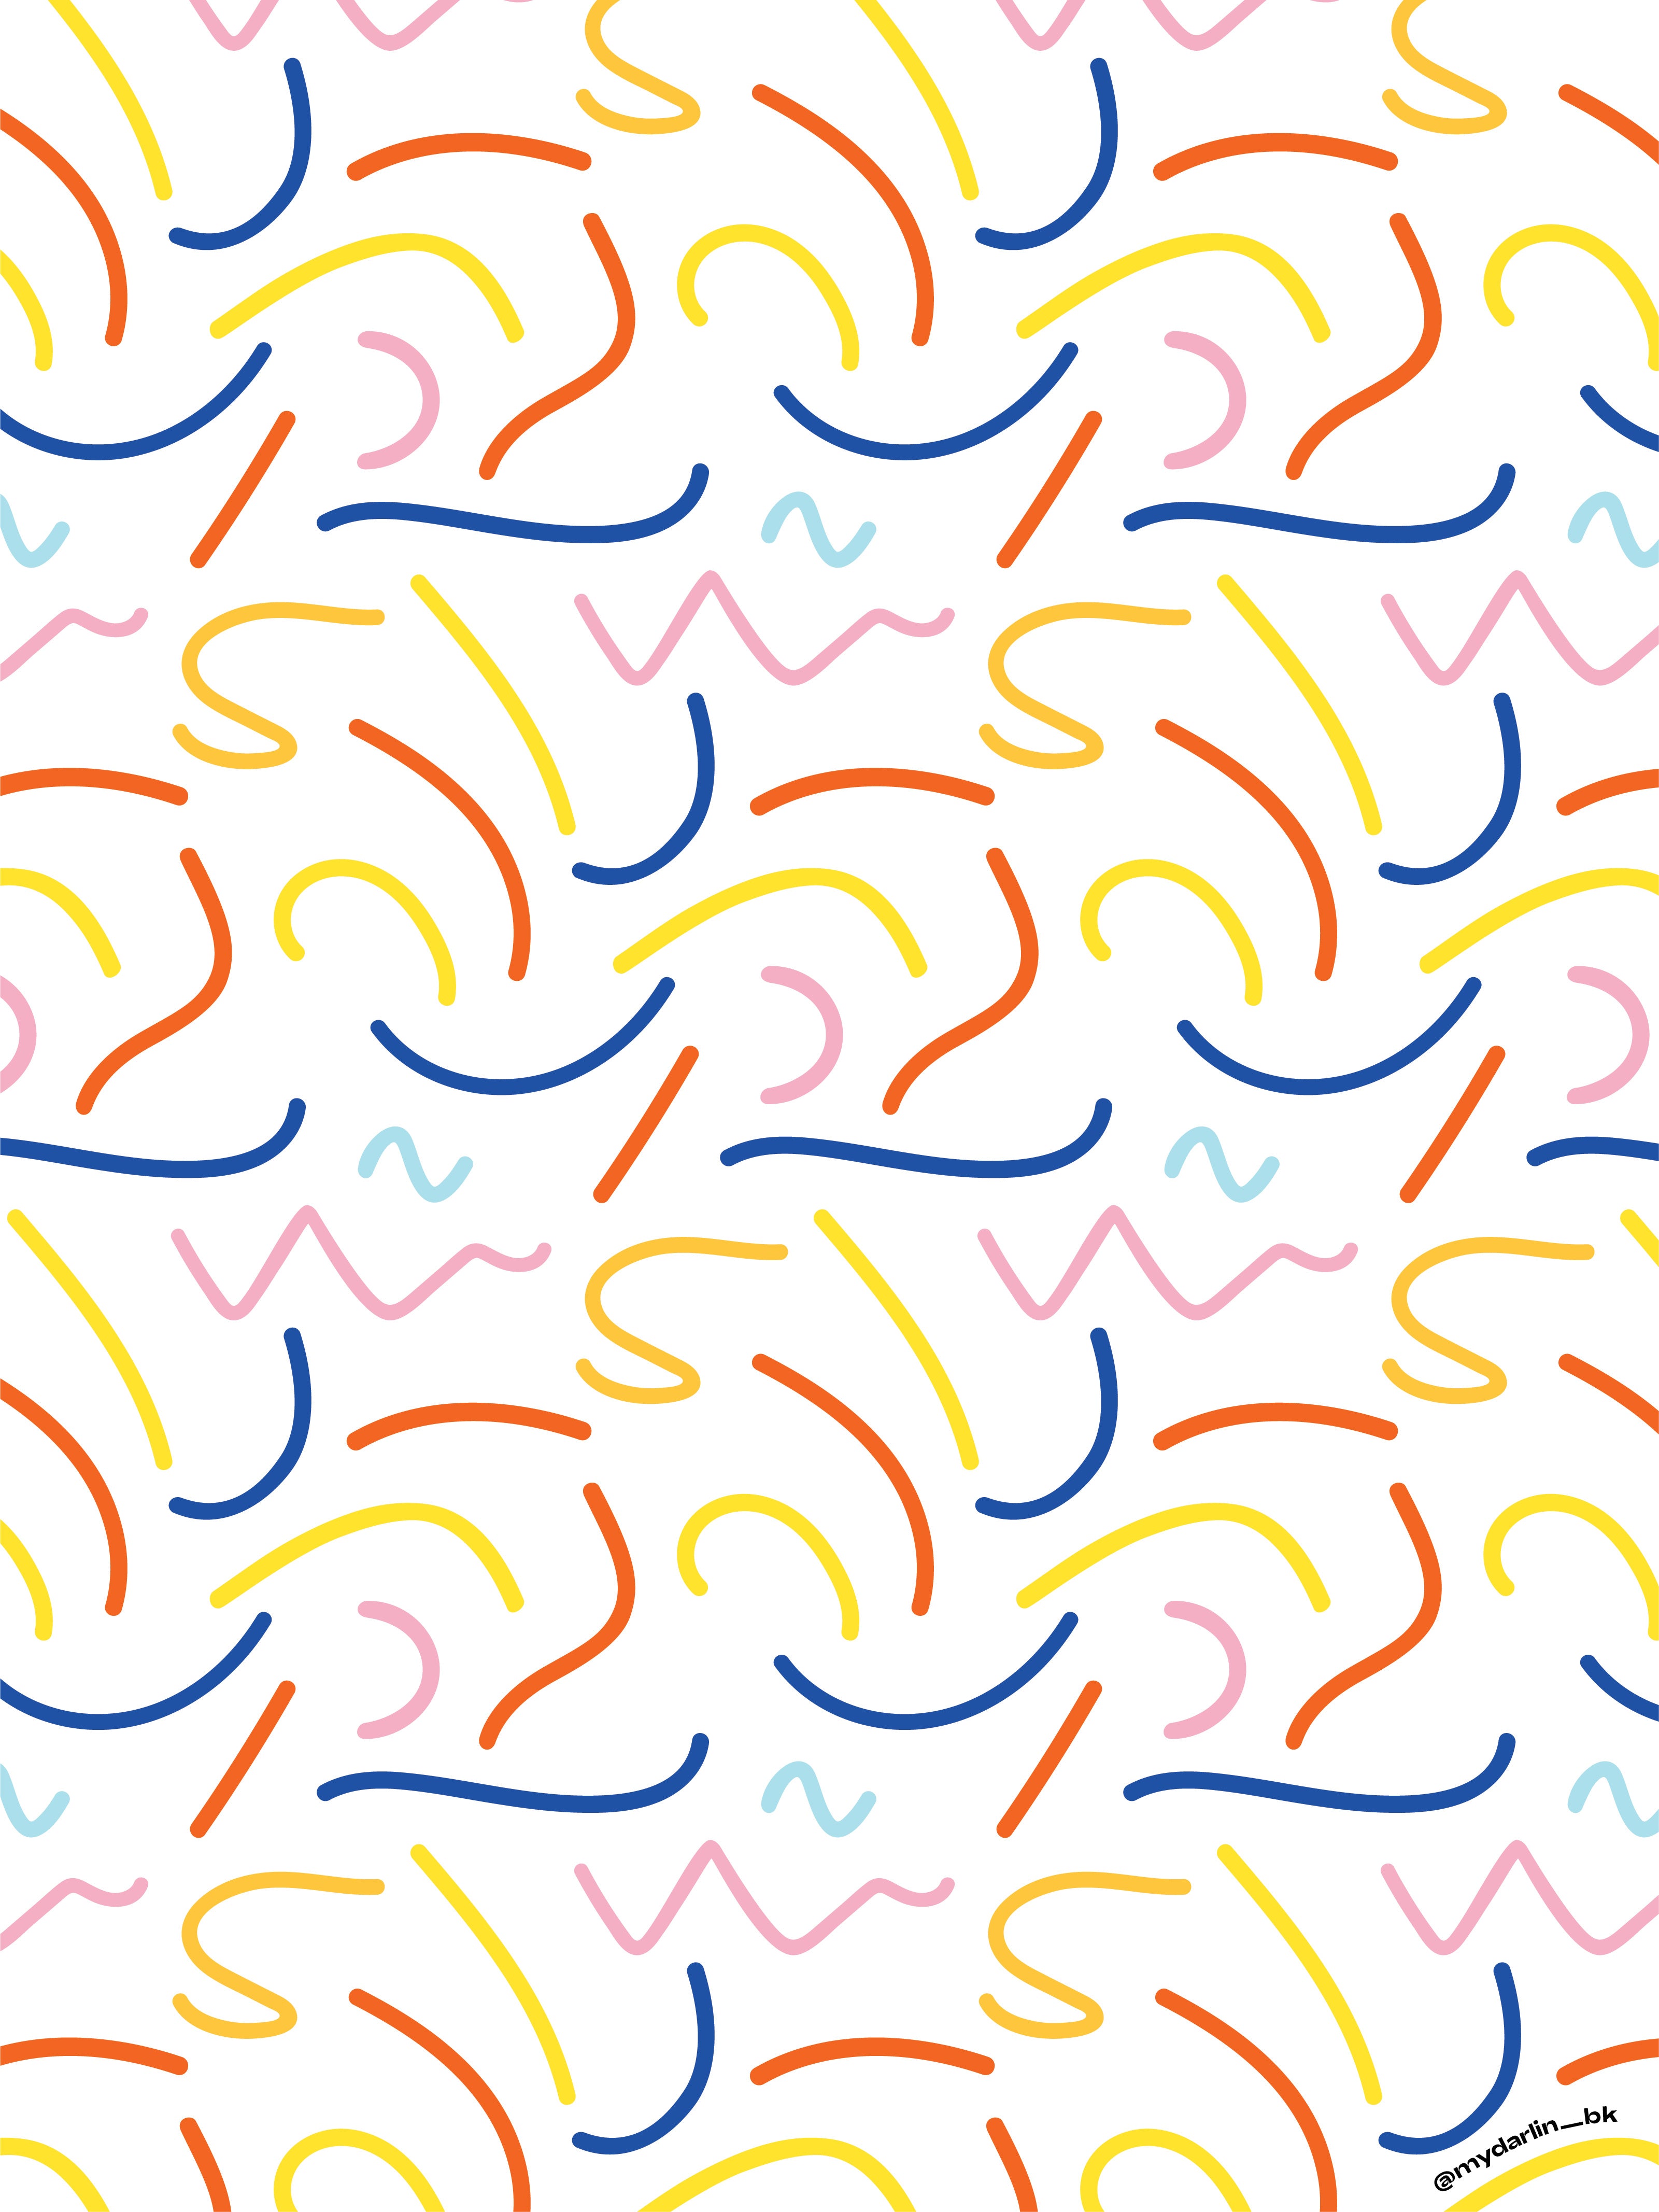 "Squiggle Party" squiggly shapes pattern free downloadable device wallpaper to brighten up your devices by @mydarlin_bk